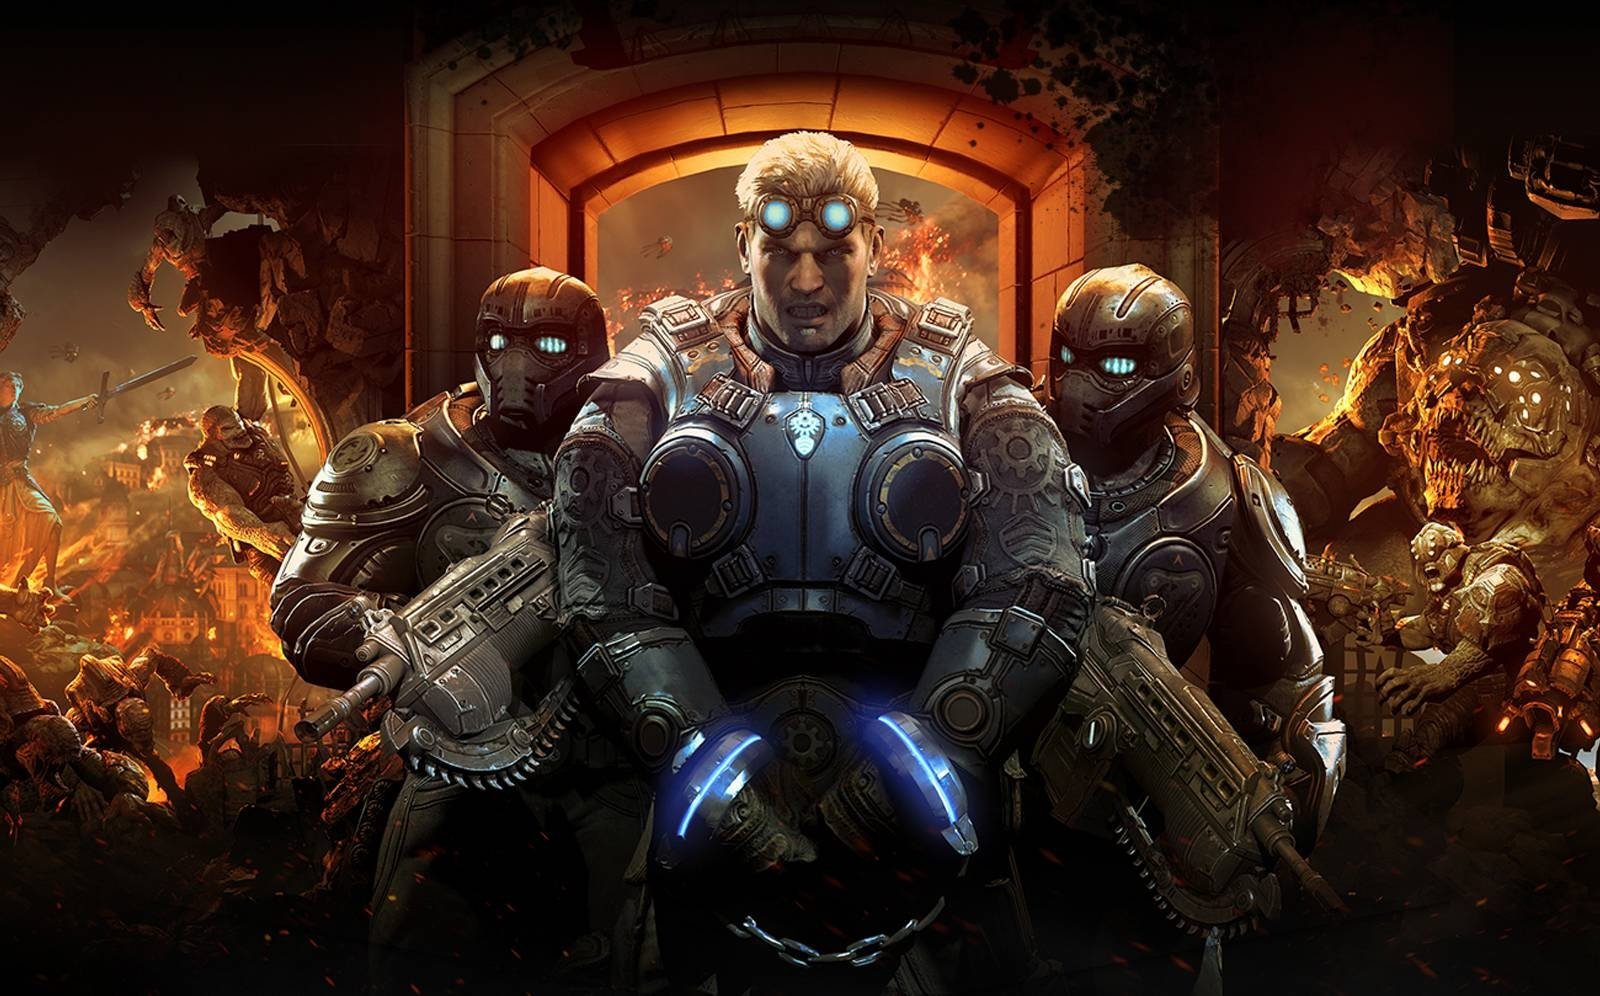 Gears of War could receive a collection in the style of Halo: The Master Chief Collection